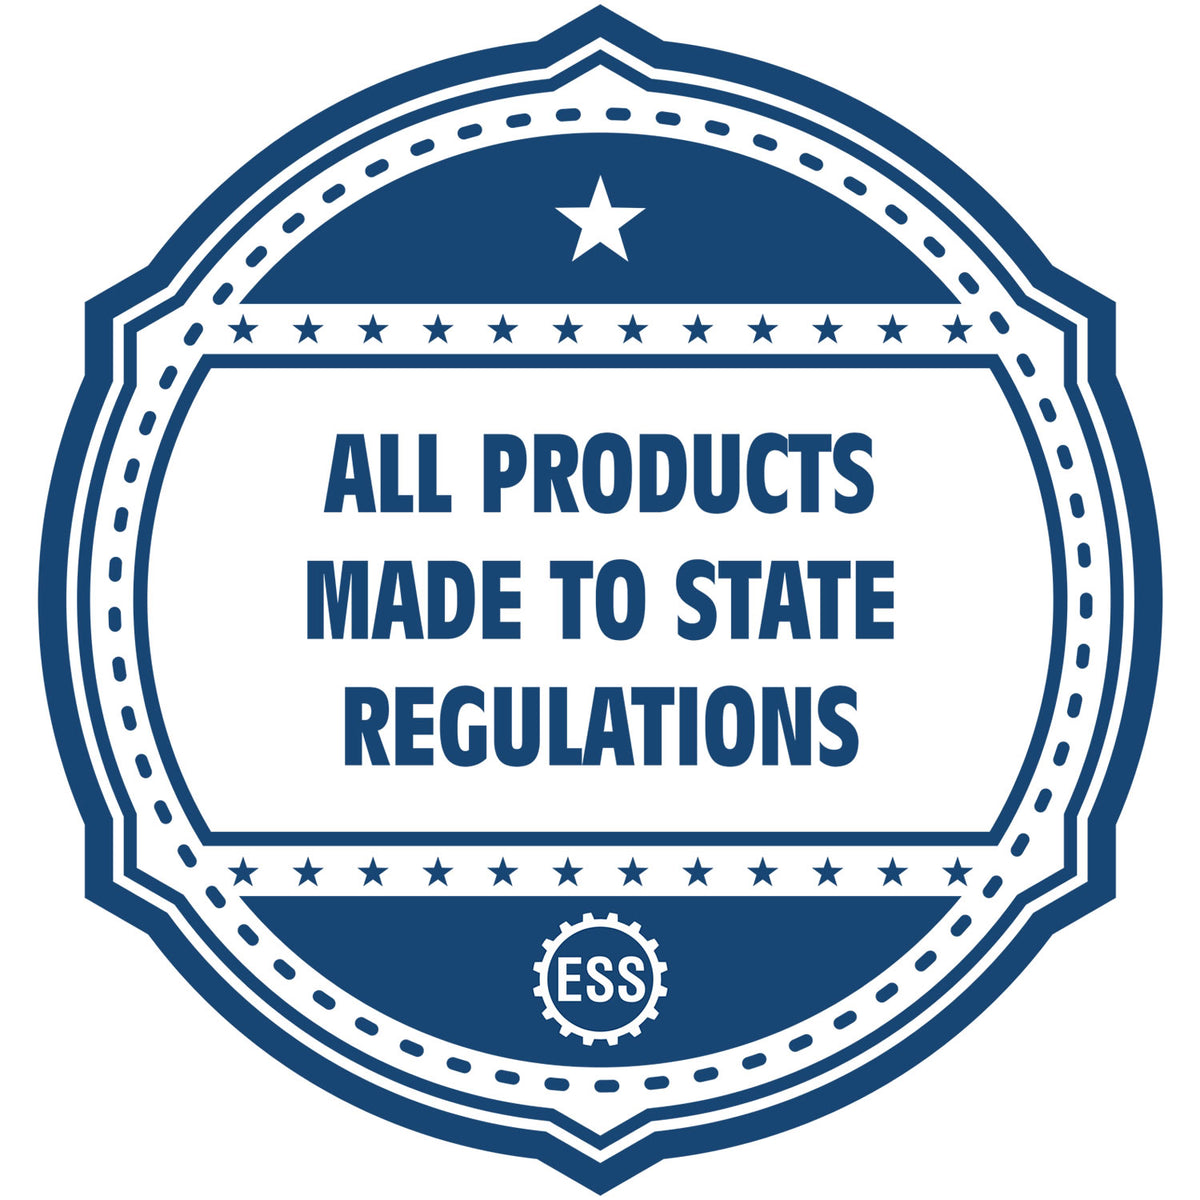 An icon or badge element for the Soft Pocket Illinois Landscape Architect Embosser showing that this product is made in compliance with state regulations.